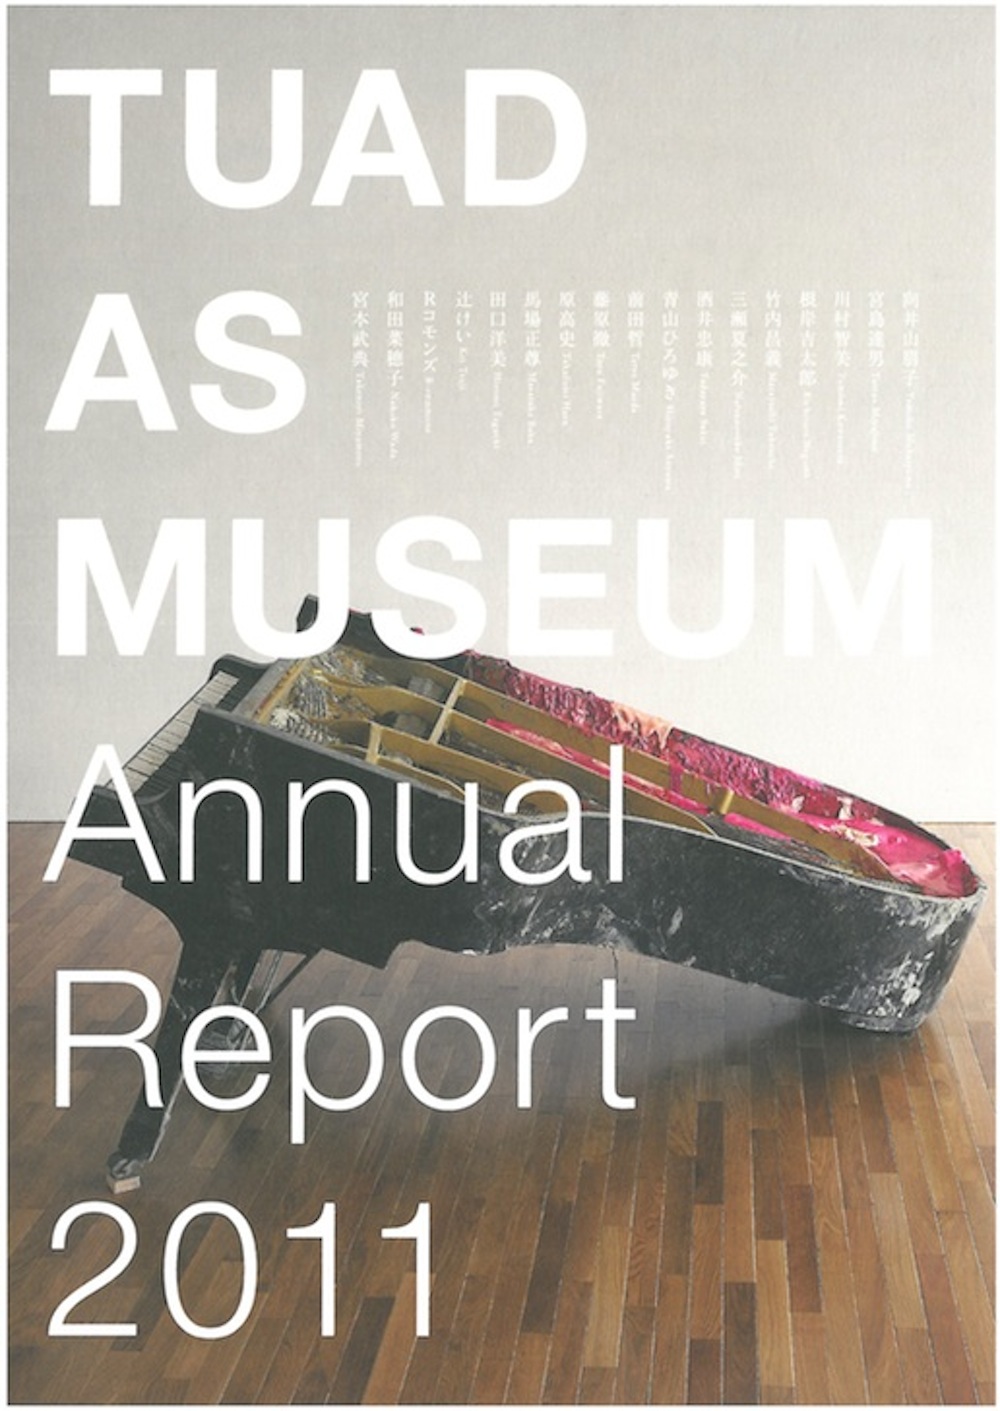 TUAD AS MUSEUM : Annual Report 2011